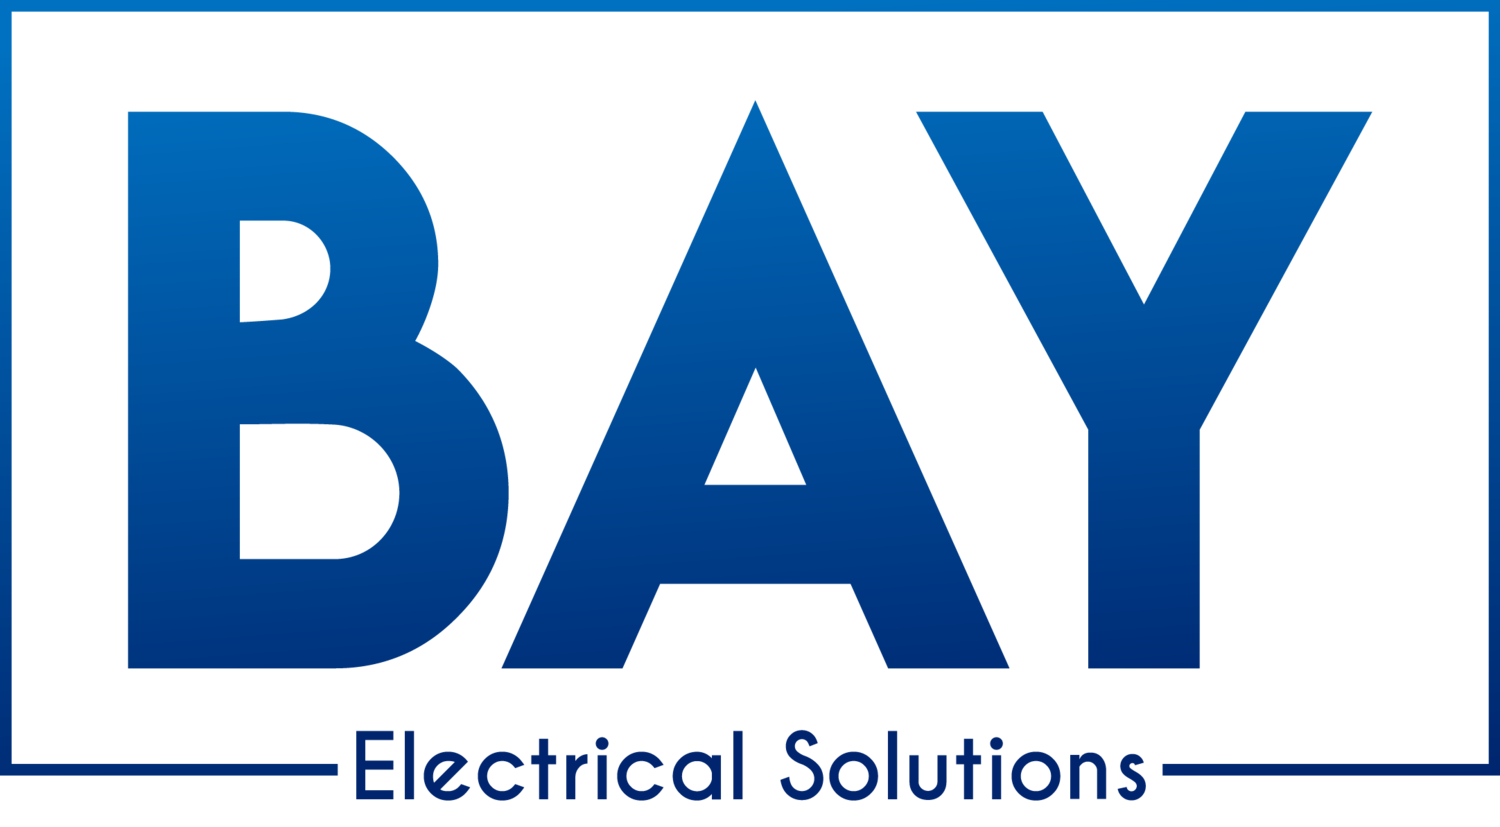 Bay Electrical Solutions